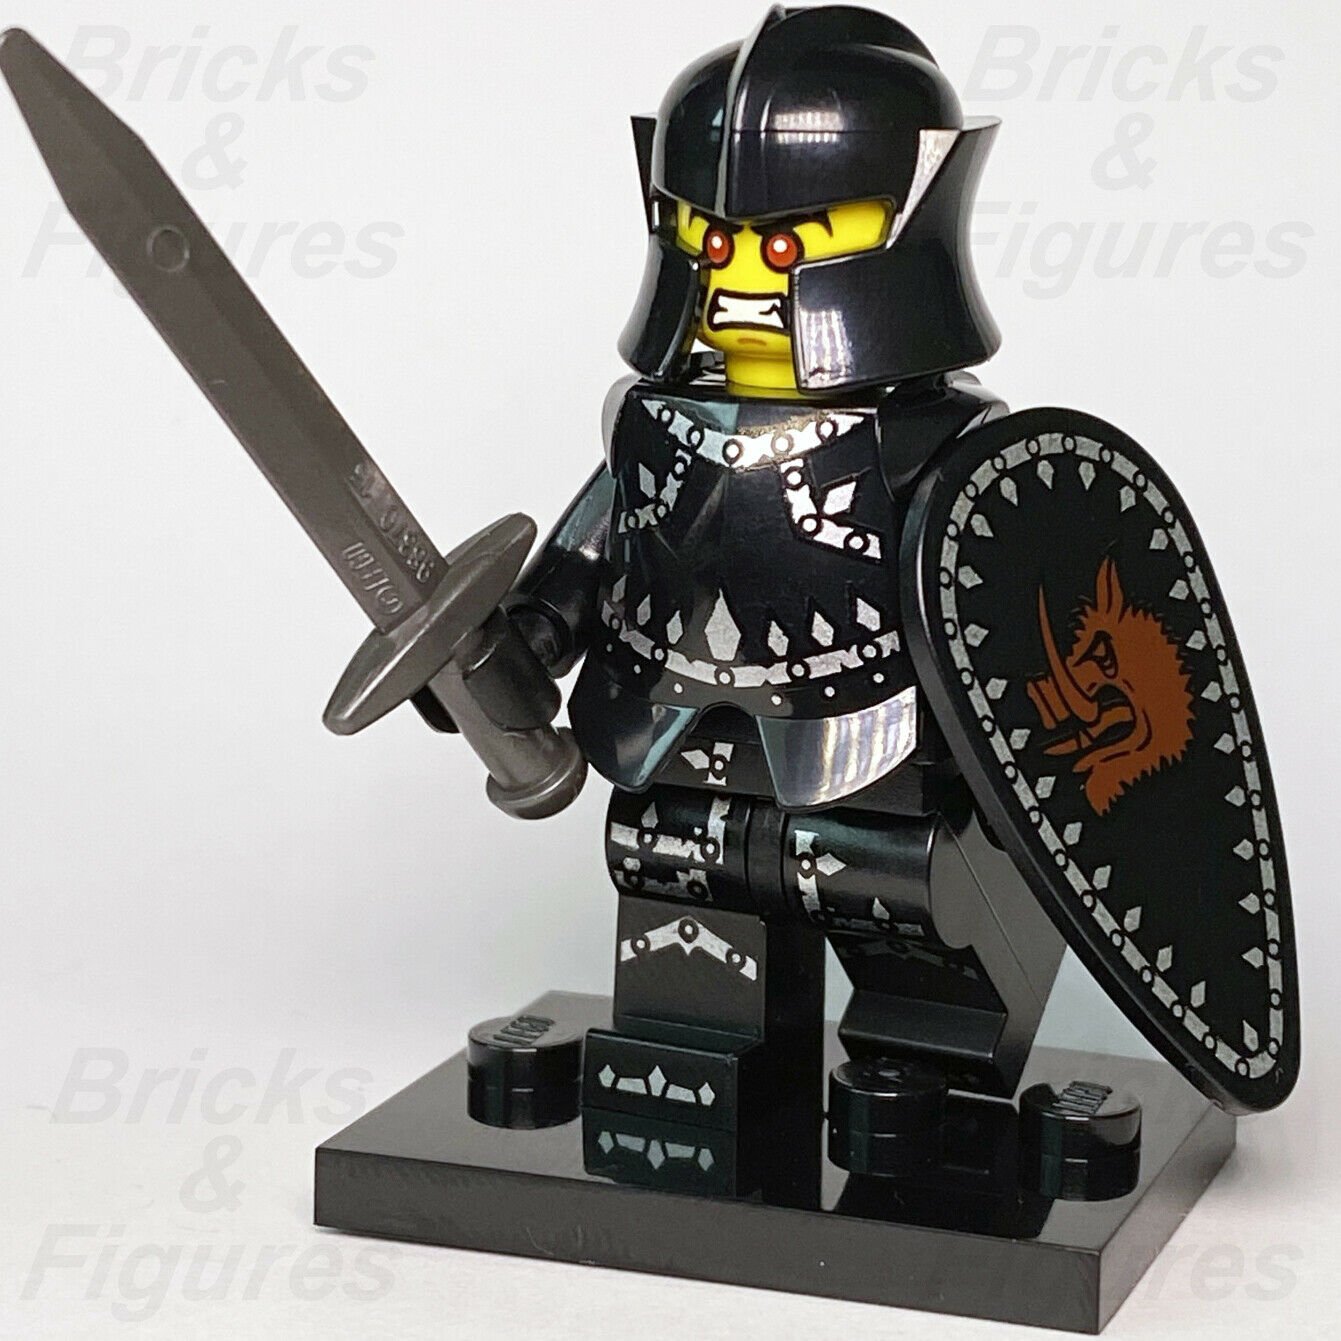 New LEGO Evil Knight Collectible Minifigures Series 7 Rare Minifig 8831 - Bricks & Figures